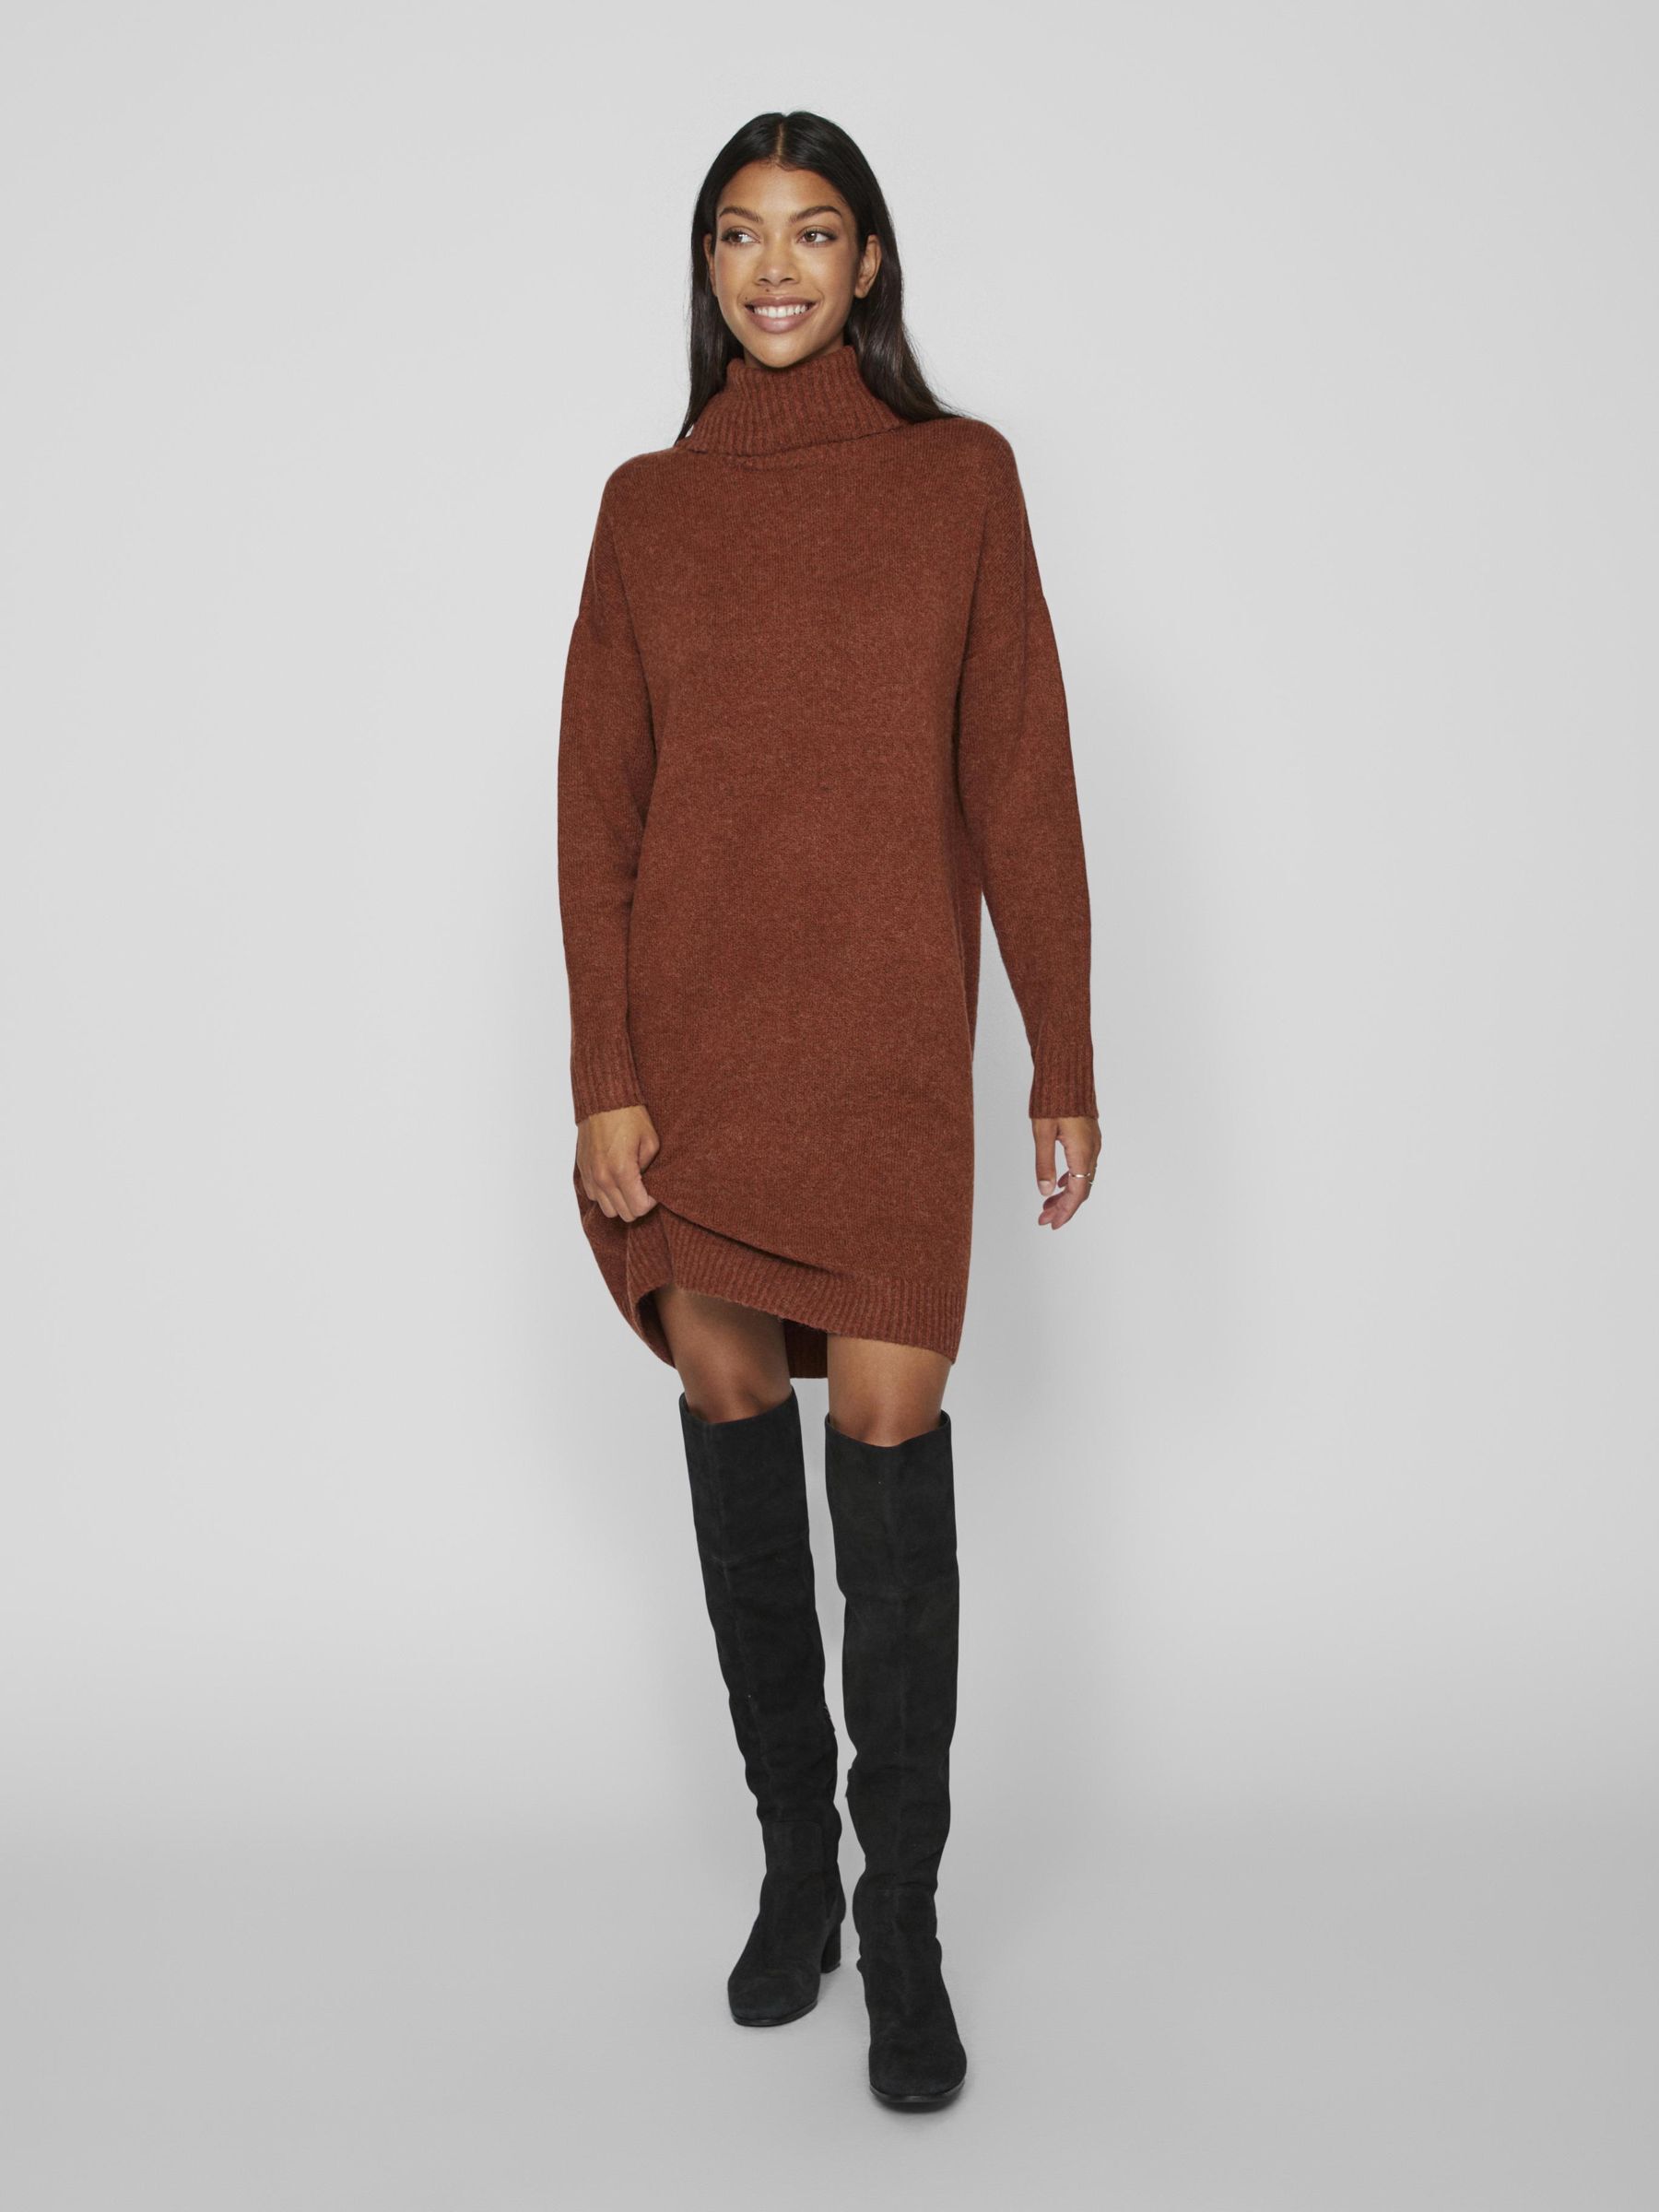 Knit Dresses For Women - Warm And Comfortable | VILA